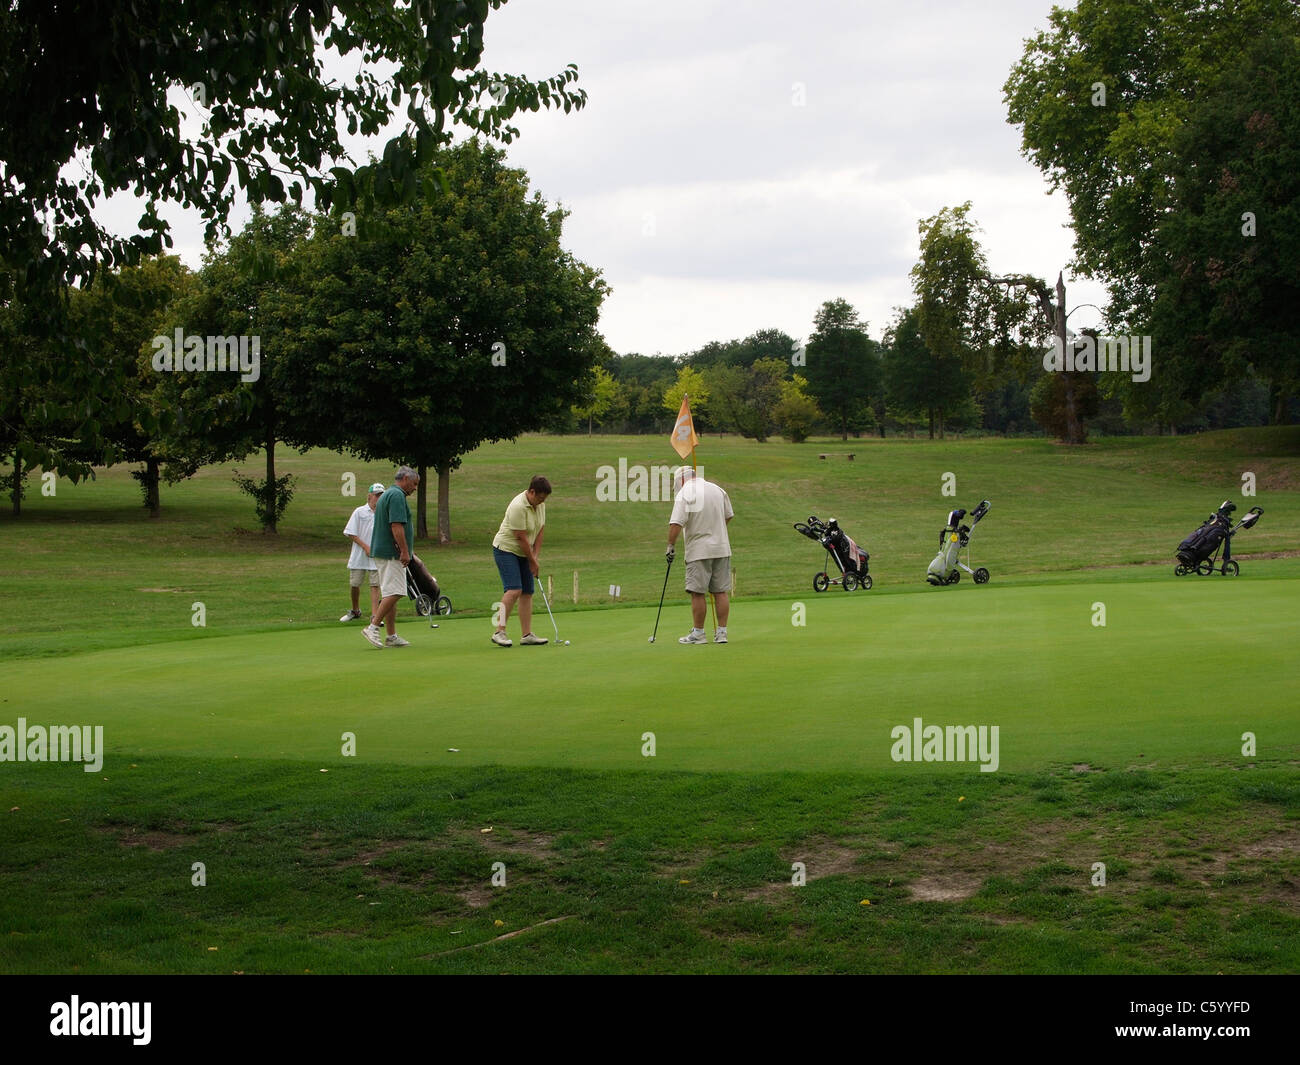 People playing golf at Domaine St. Hilaire, Loire valley, France Stock Photo